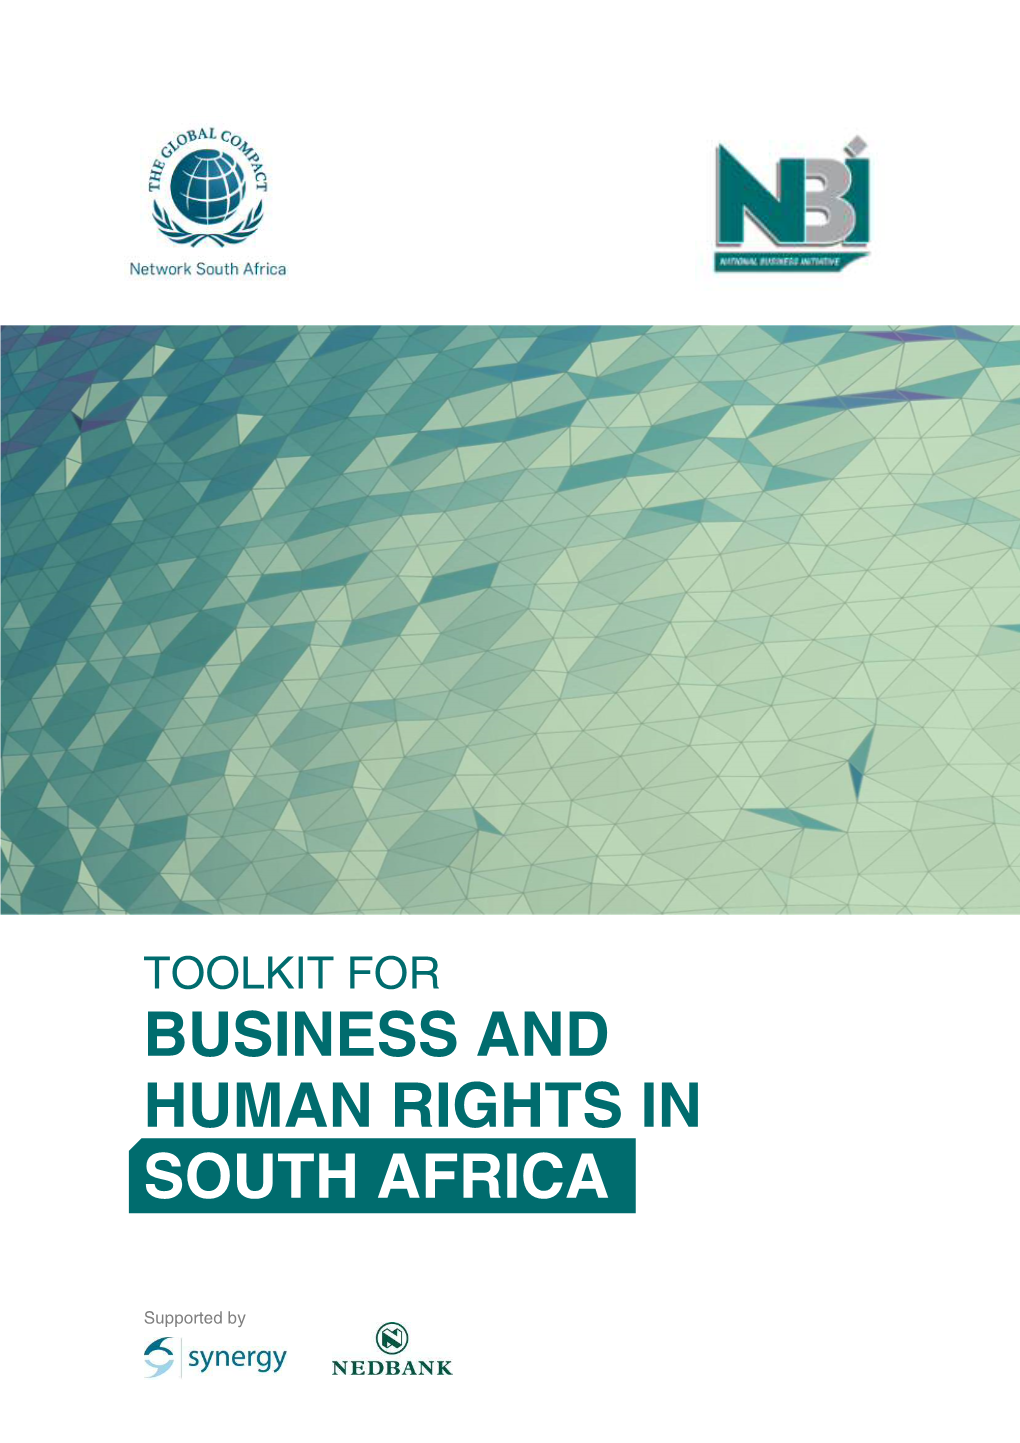 Business and Human Rights in South Africa